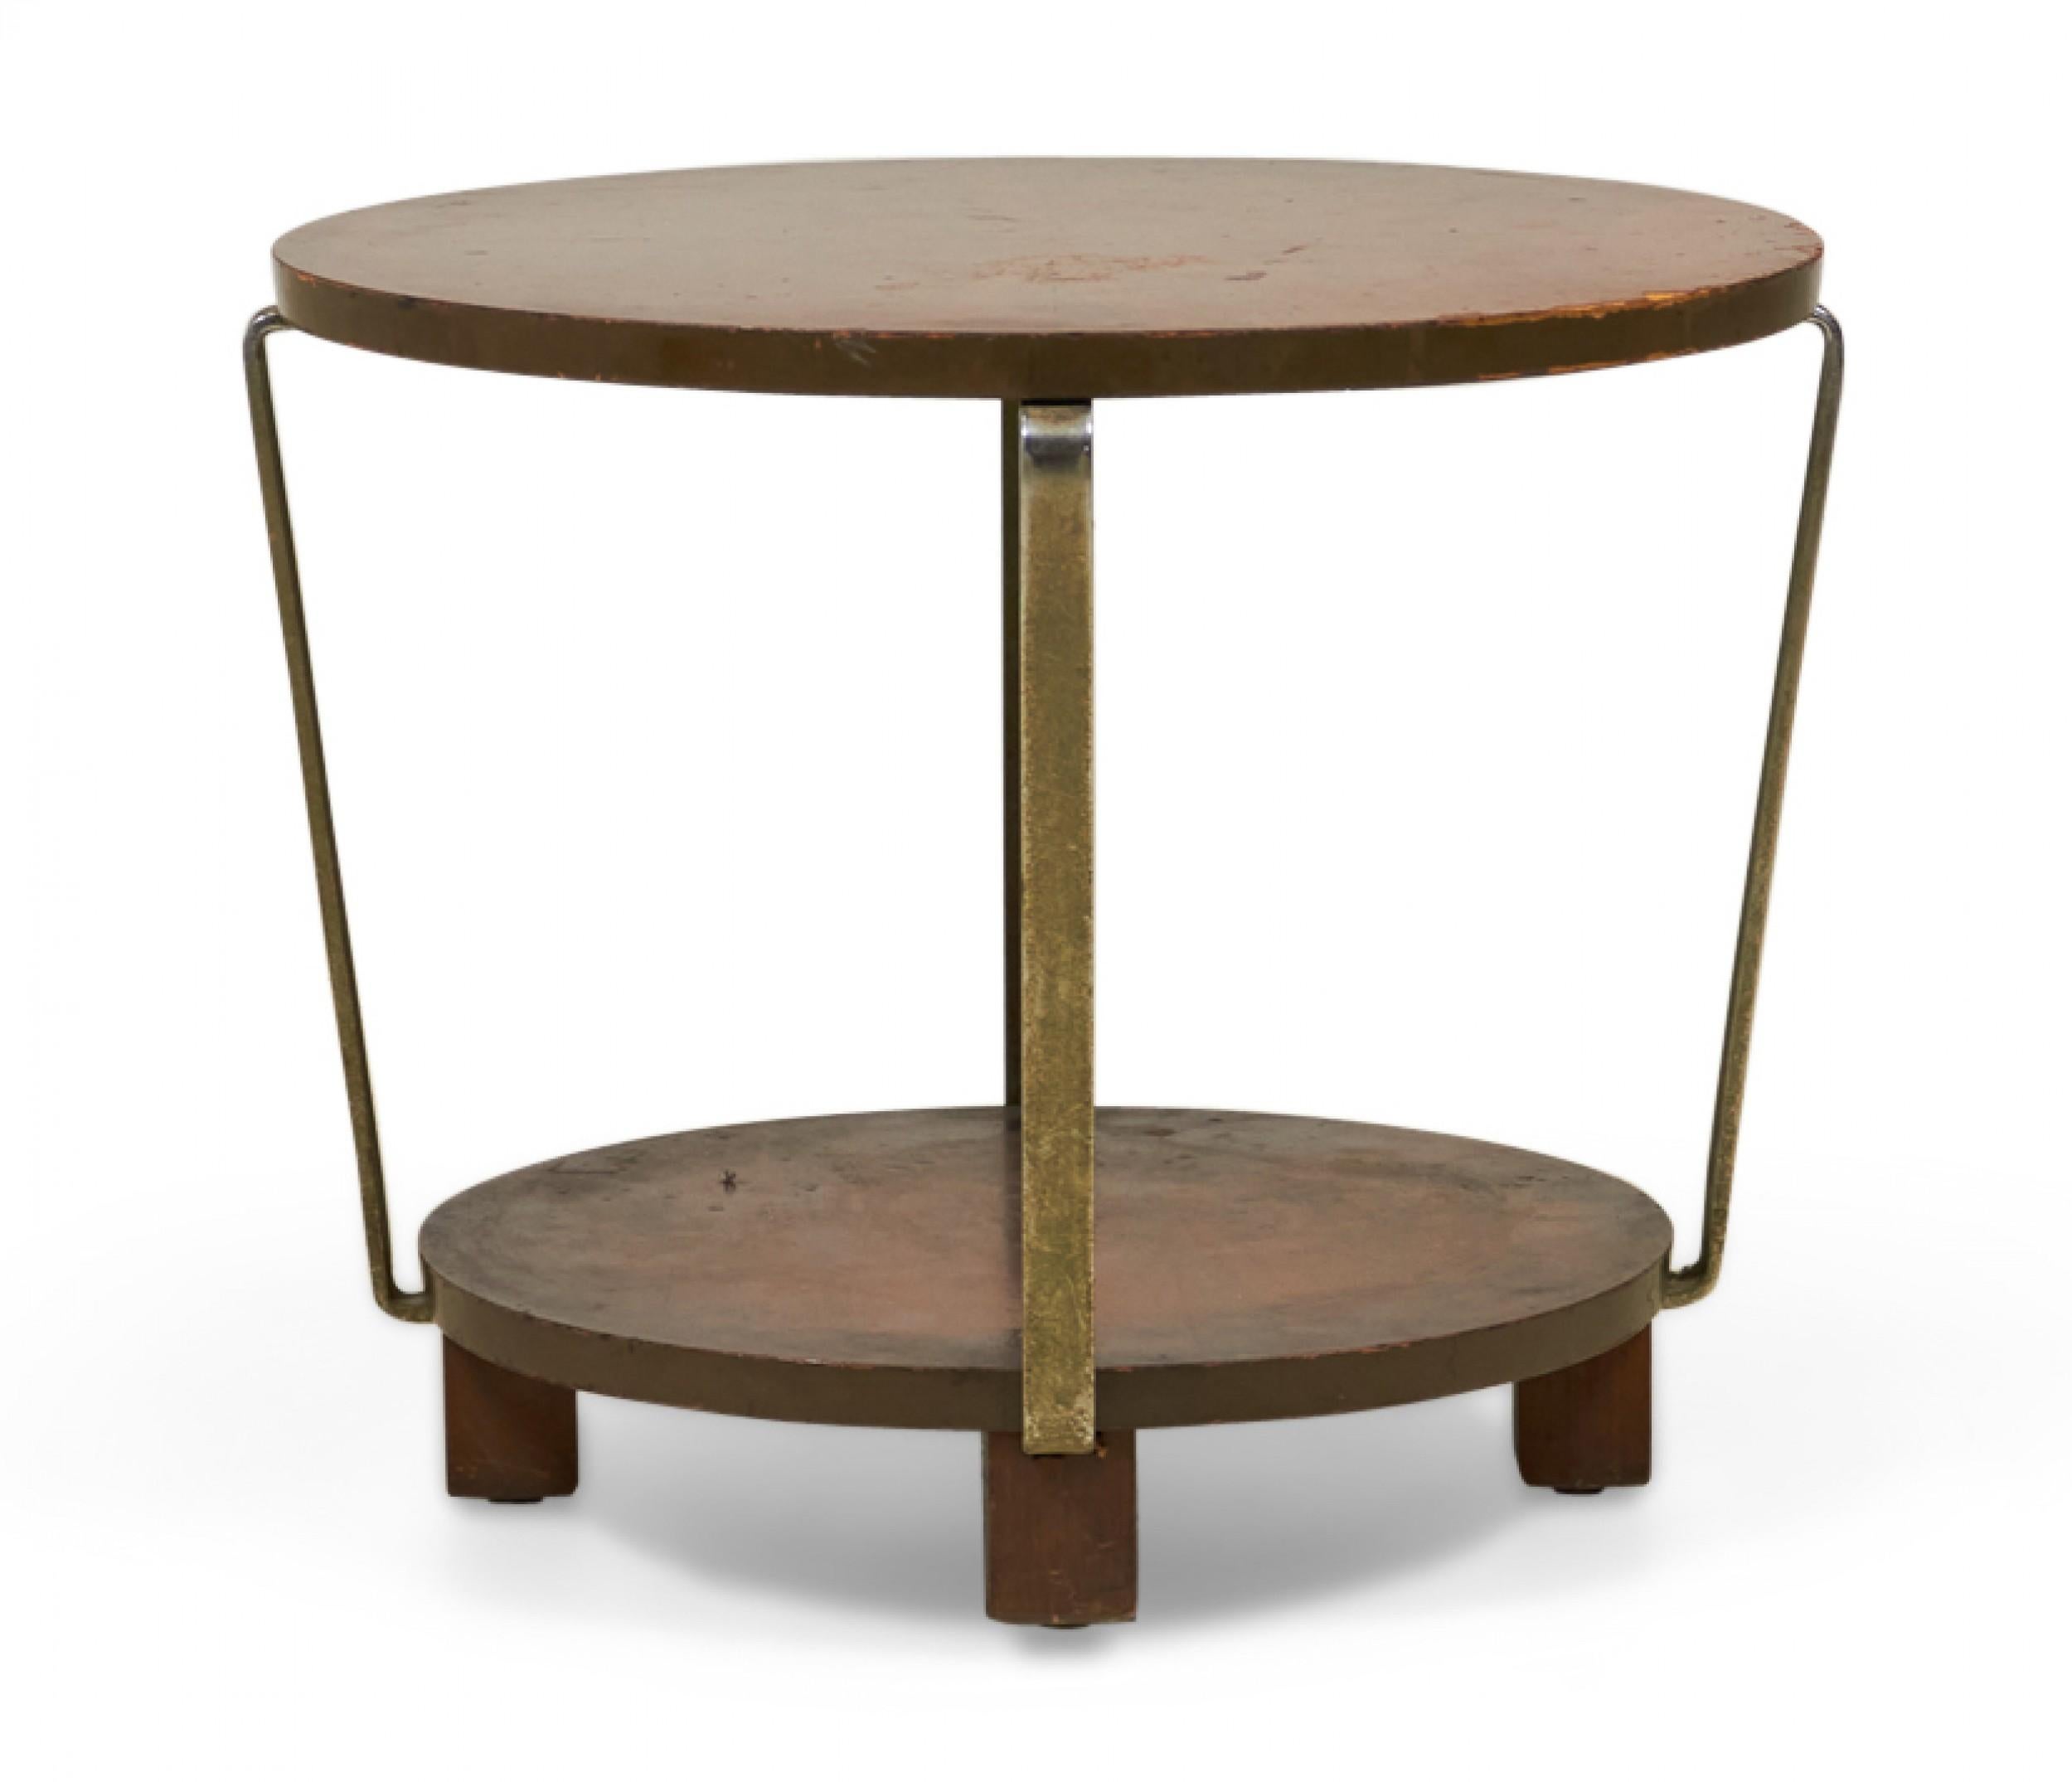 American Art Deco circular walnut table with four brass supports that angle inward to connect to a smaller bottom shelf resting on four square walnut feet.
